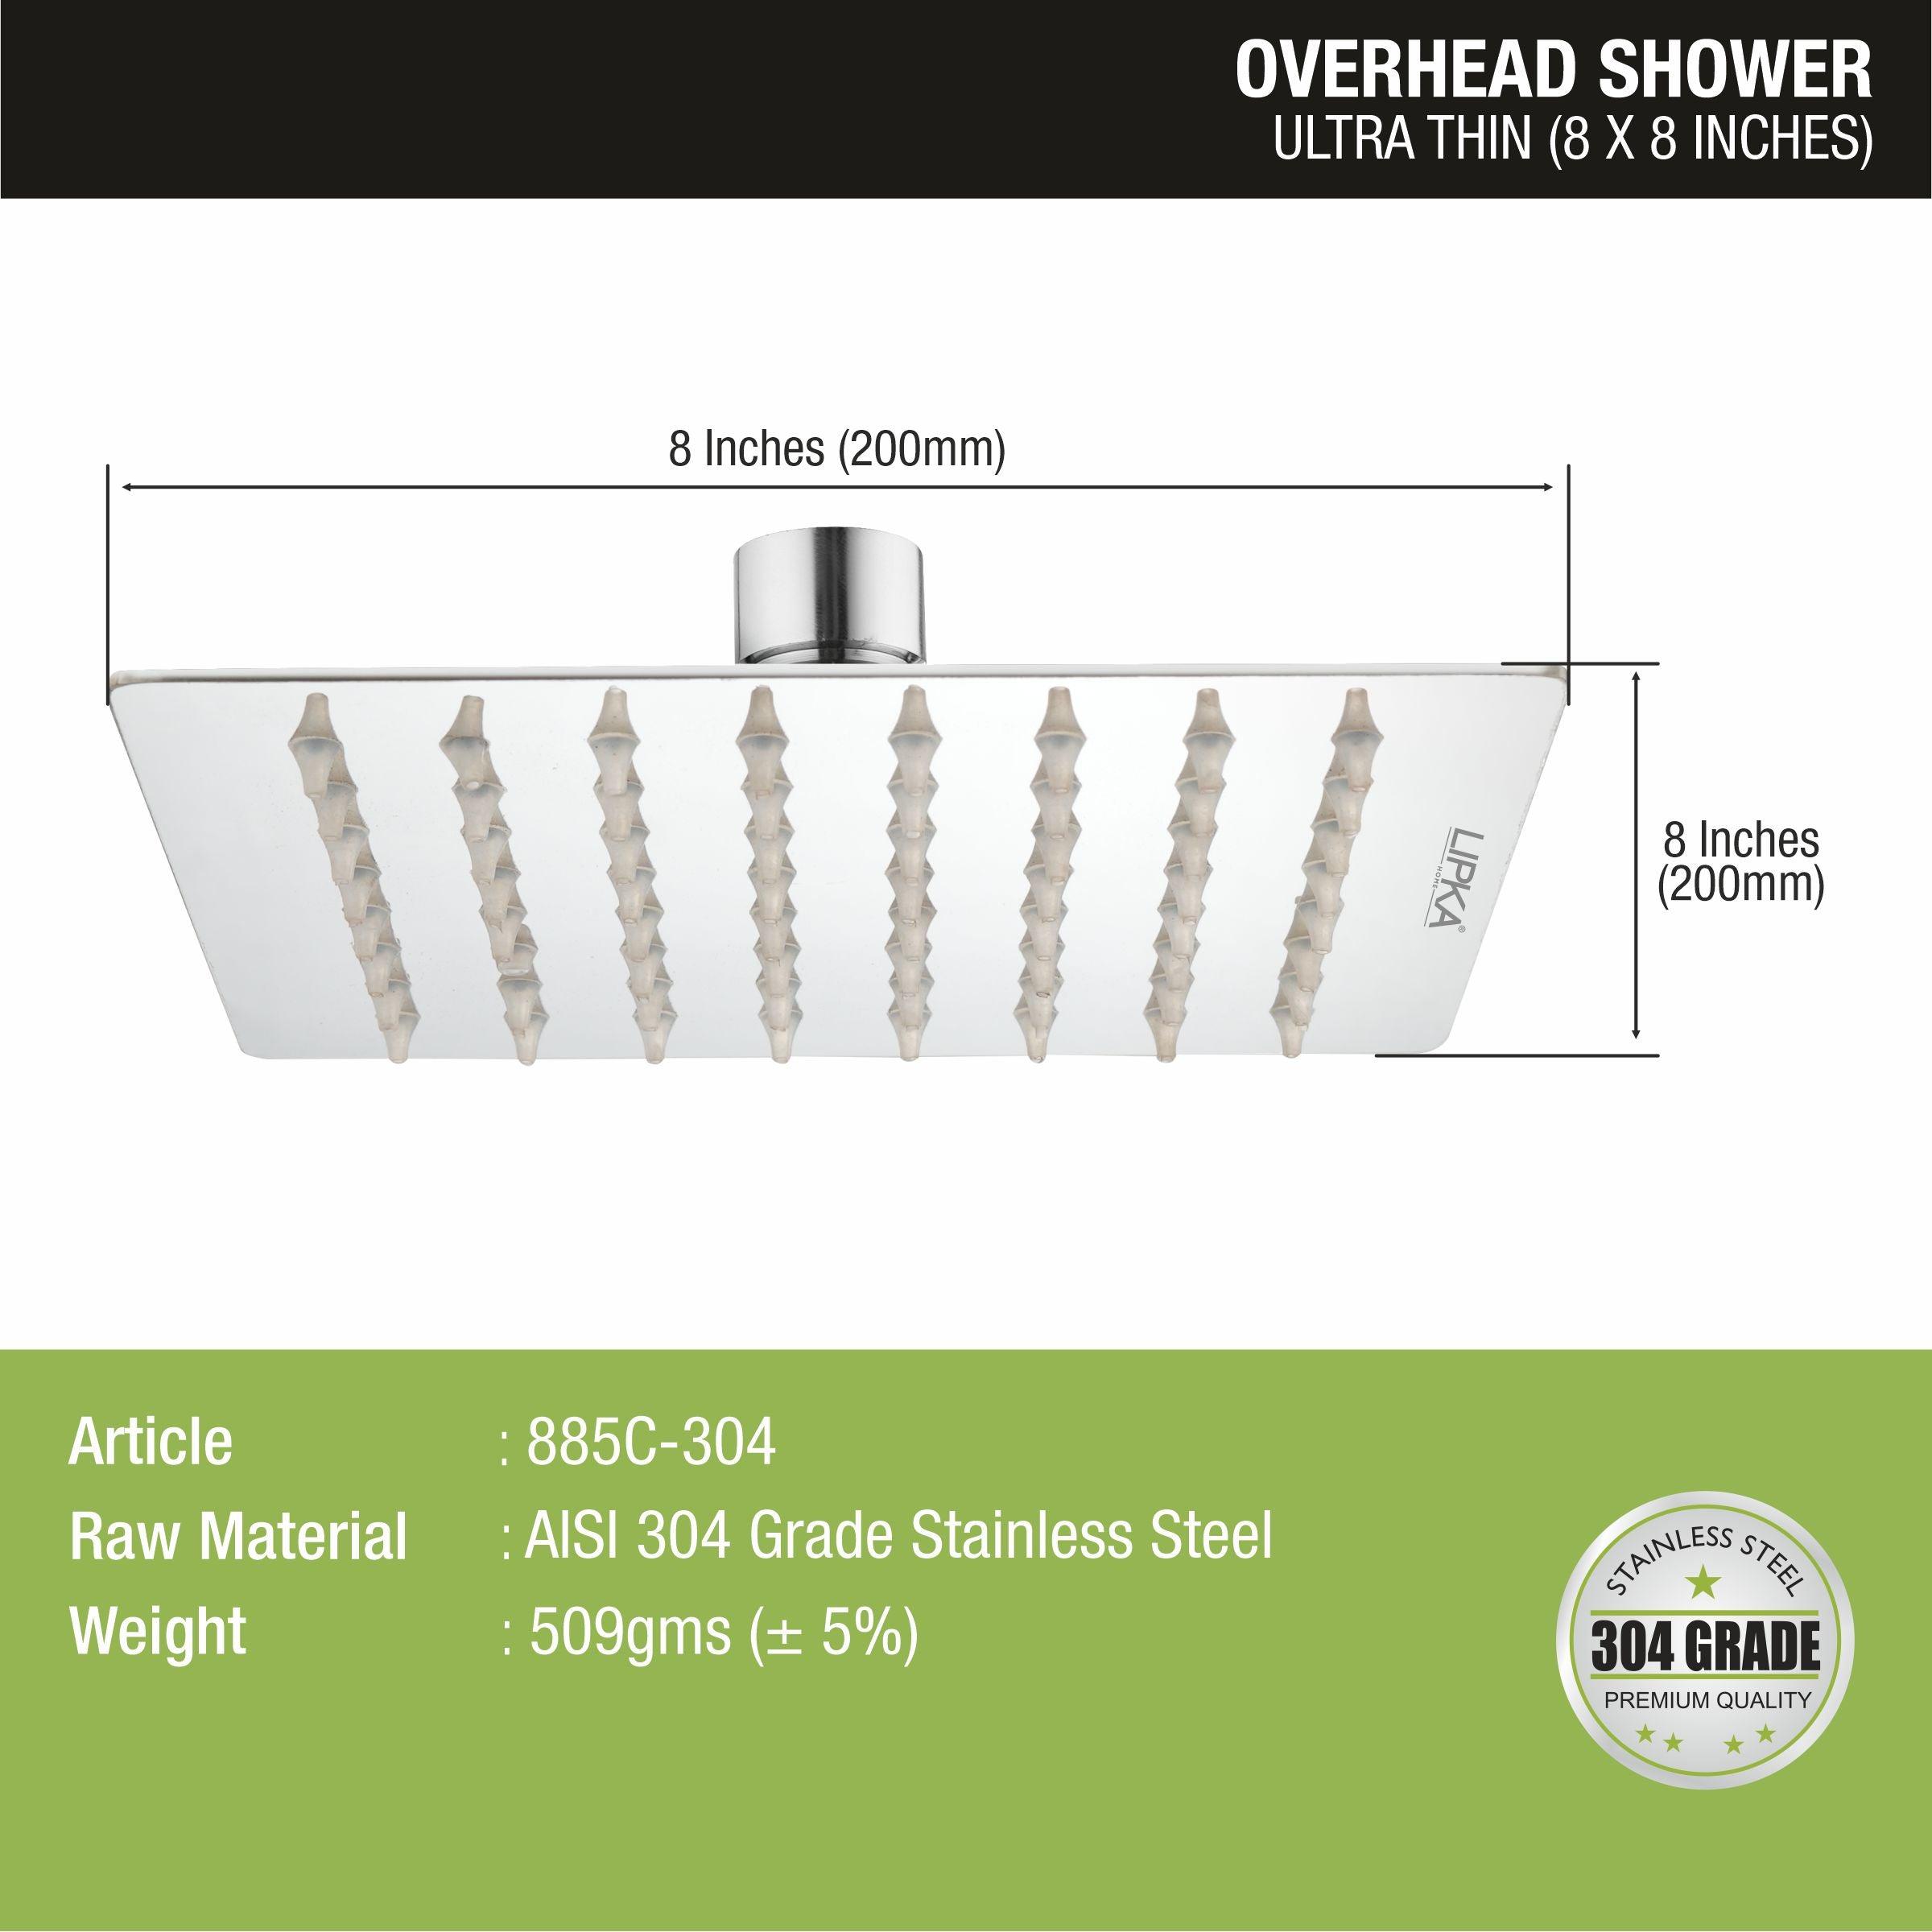 Ultra Thin 304-Grade Overhead Rain Shower (8 x 8 Inches) sizes and dimensions